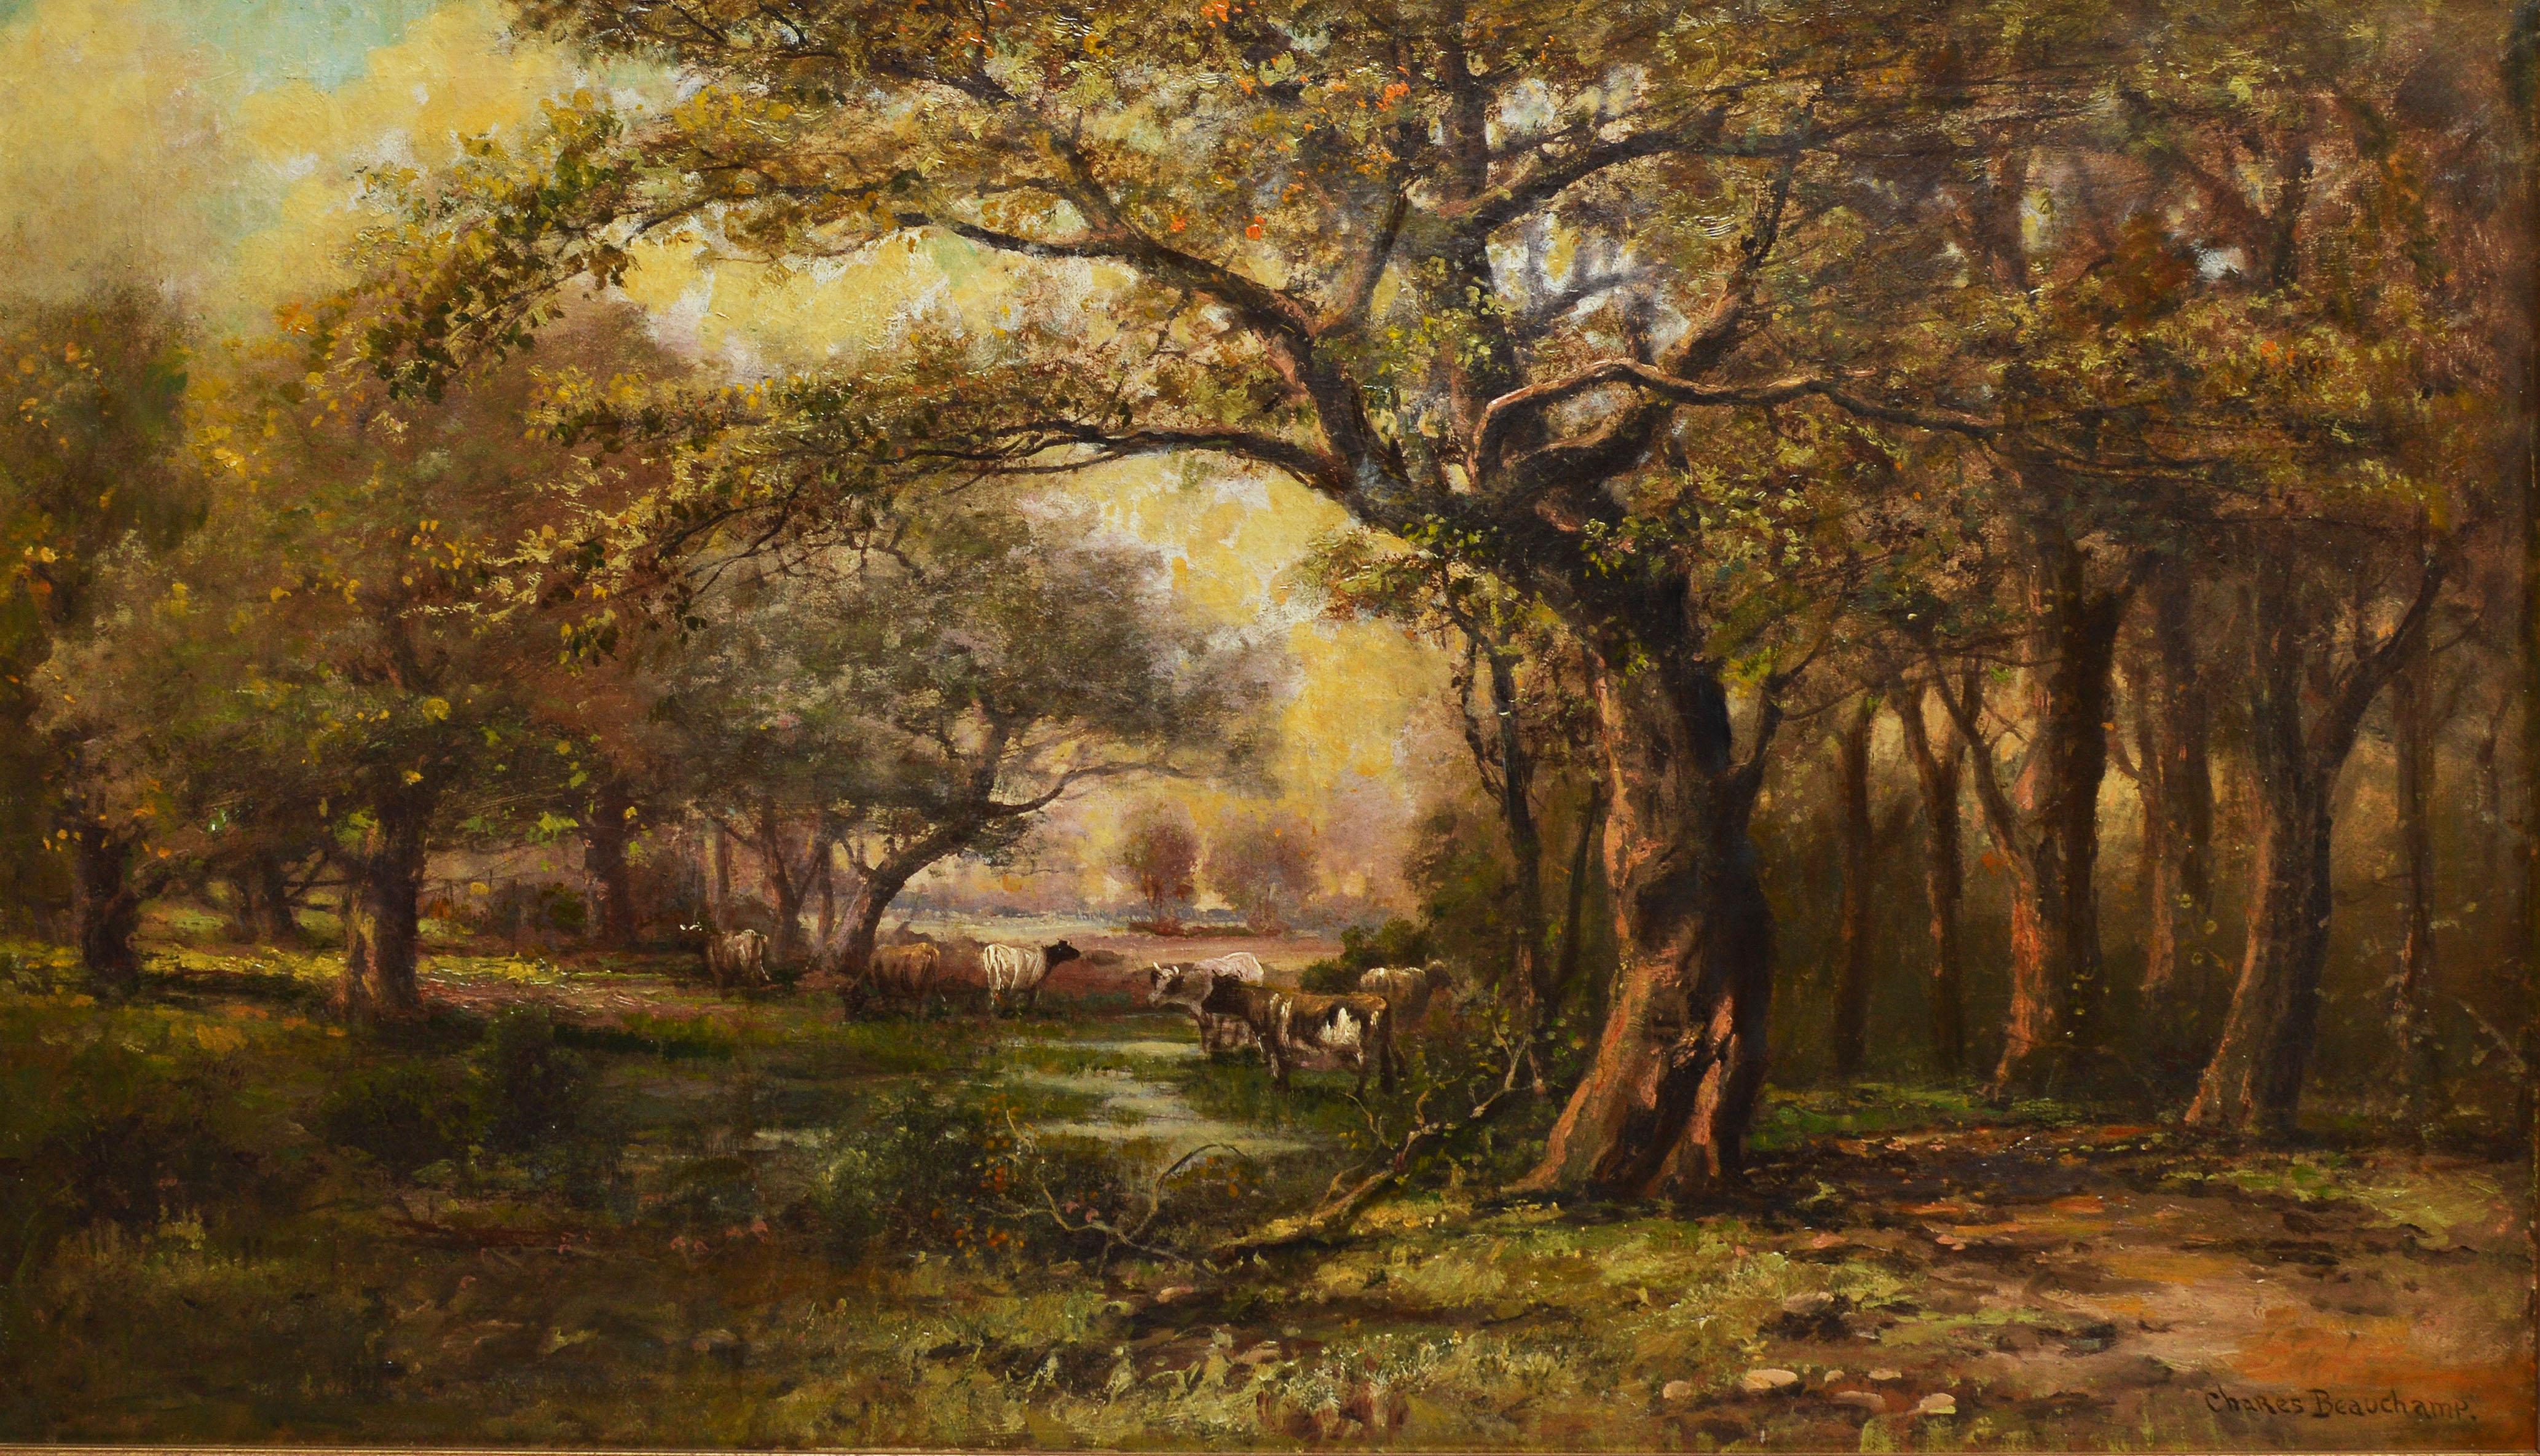 Impressionist view of a forest with cows by Charles Beauchamp.   Oil on canvas, circa 1880.  Signed lower right.  Displayed in a giltwood impressionist frame.  Image size, 36